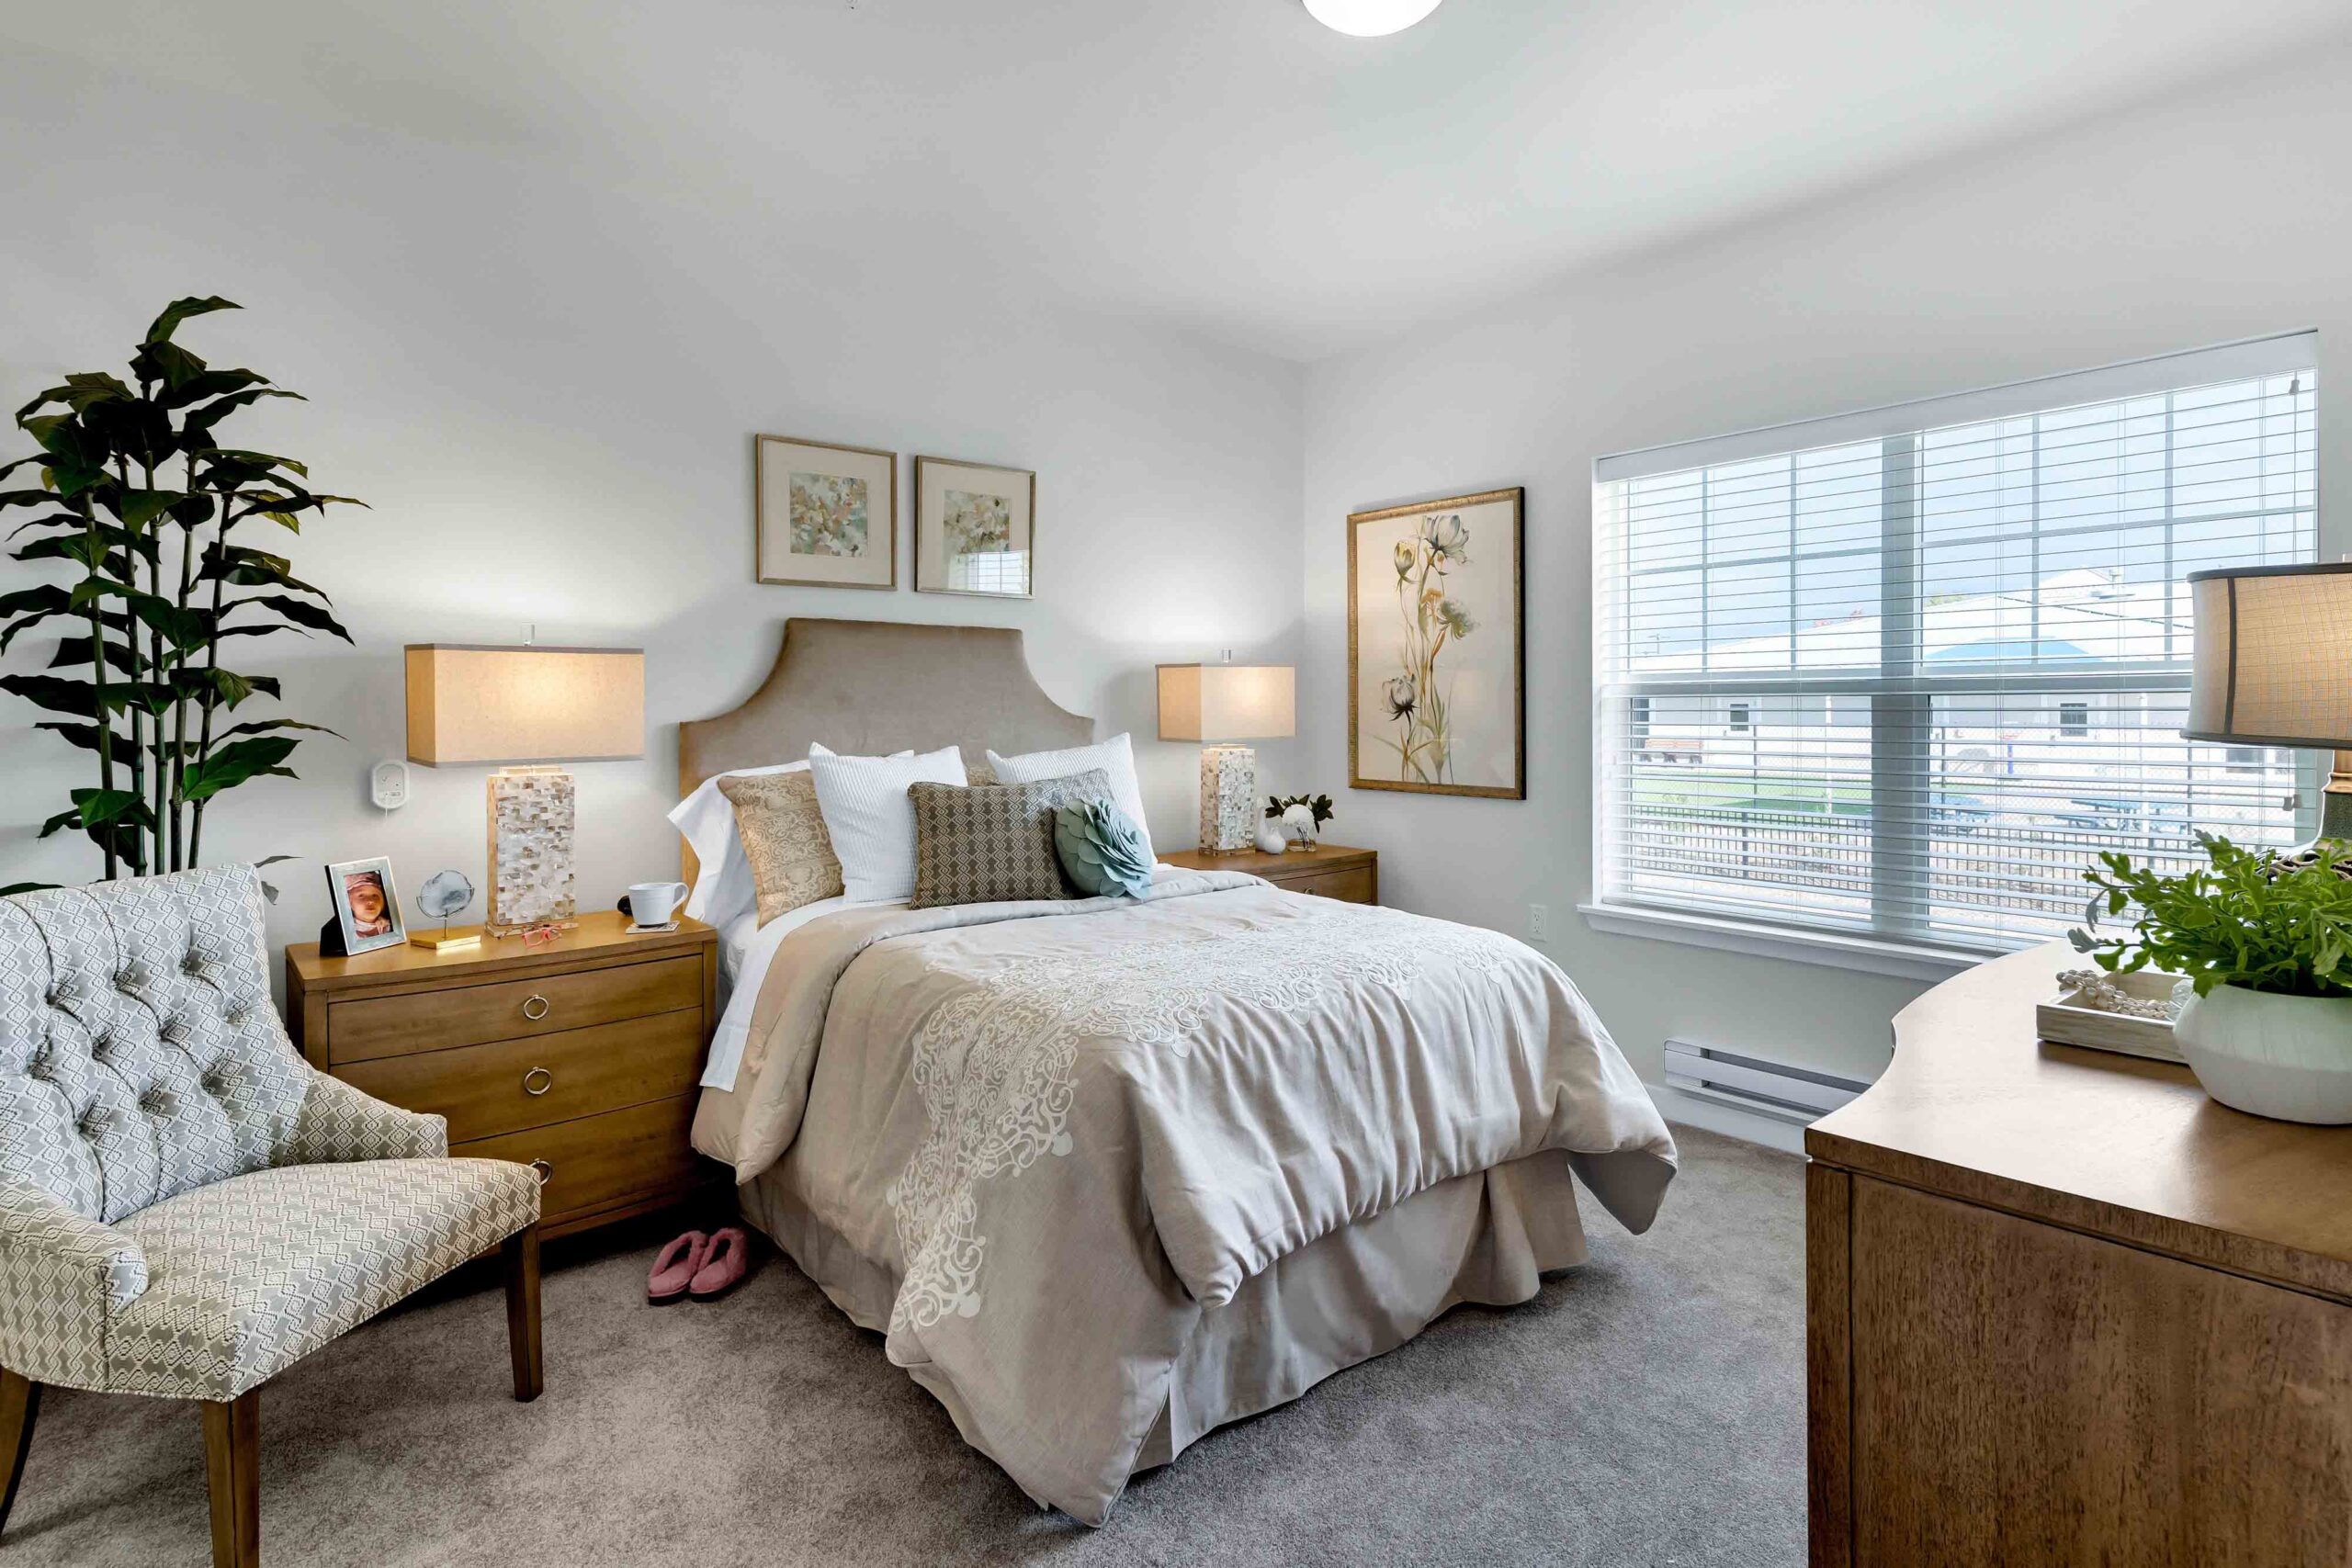 A cozy bedroom featuring a bed with a padded headboard, beige bedding, and decorative pillows. Two wooden nightstands with lamps flank the bed. A cushioned chair, large indoor plant, artwork, and a dresser are also present. A large window allows natural light in.